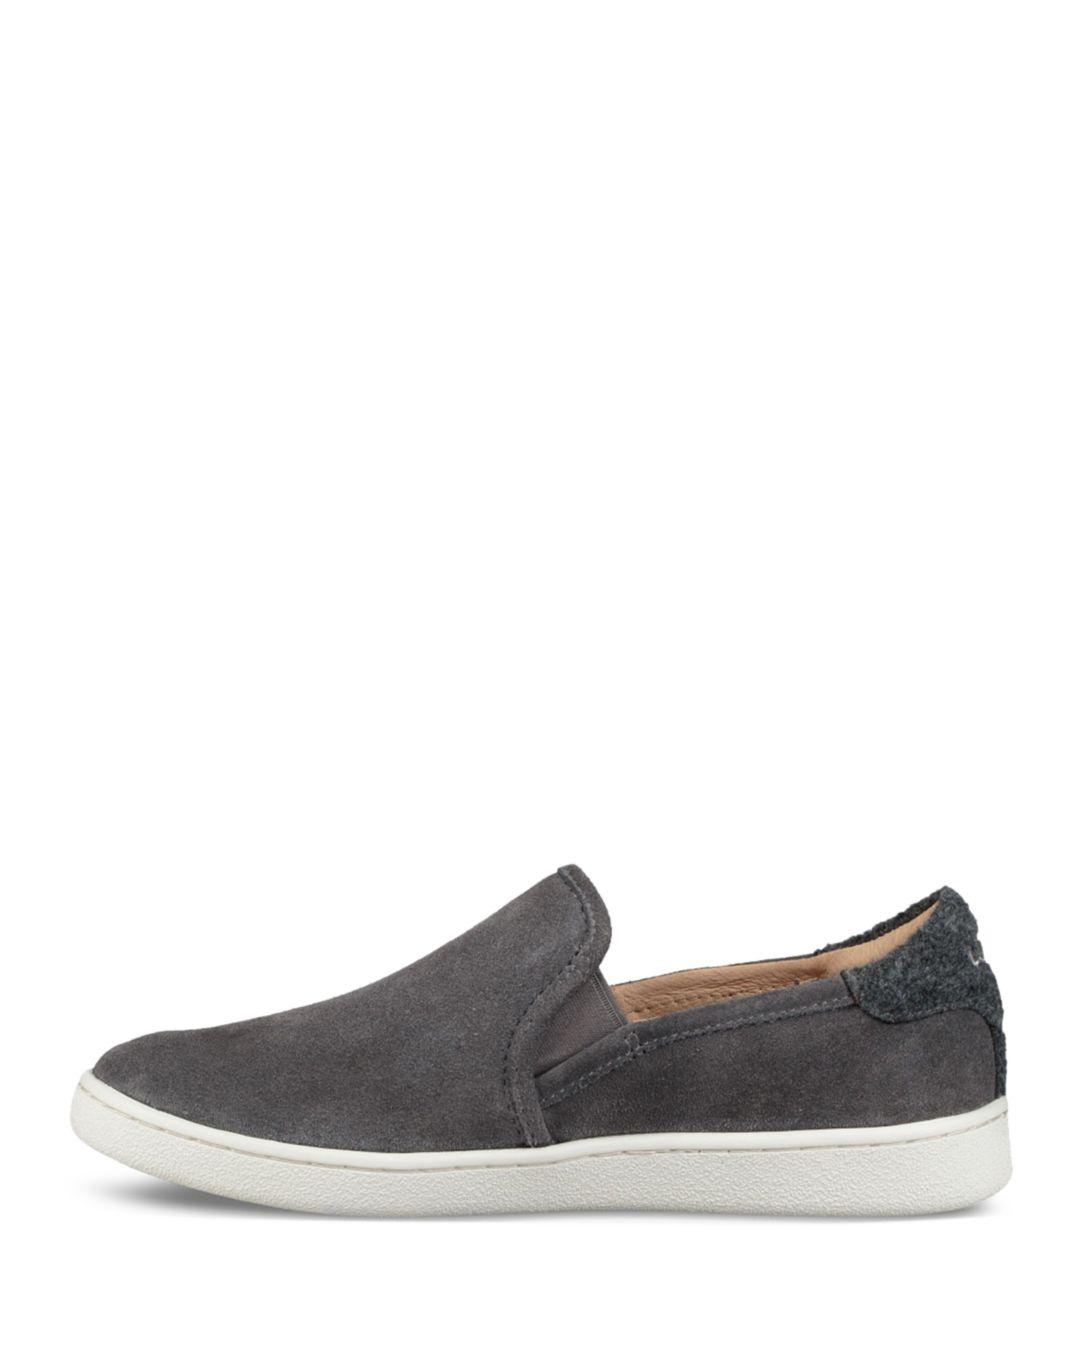 UGG Leather Women's Cas Suede Slip - On Sneakers in Charcoal (Gray) - Lyst